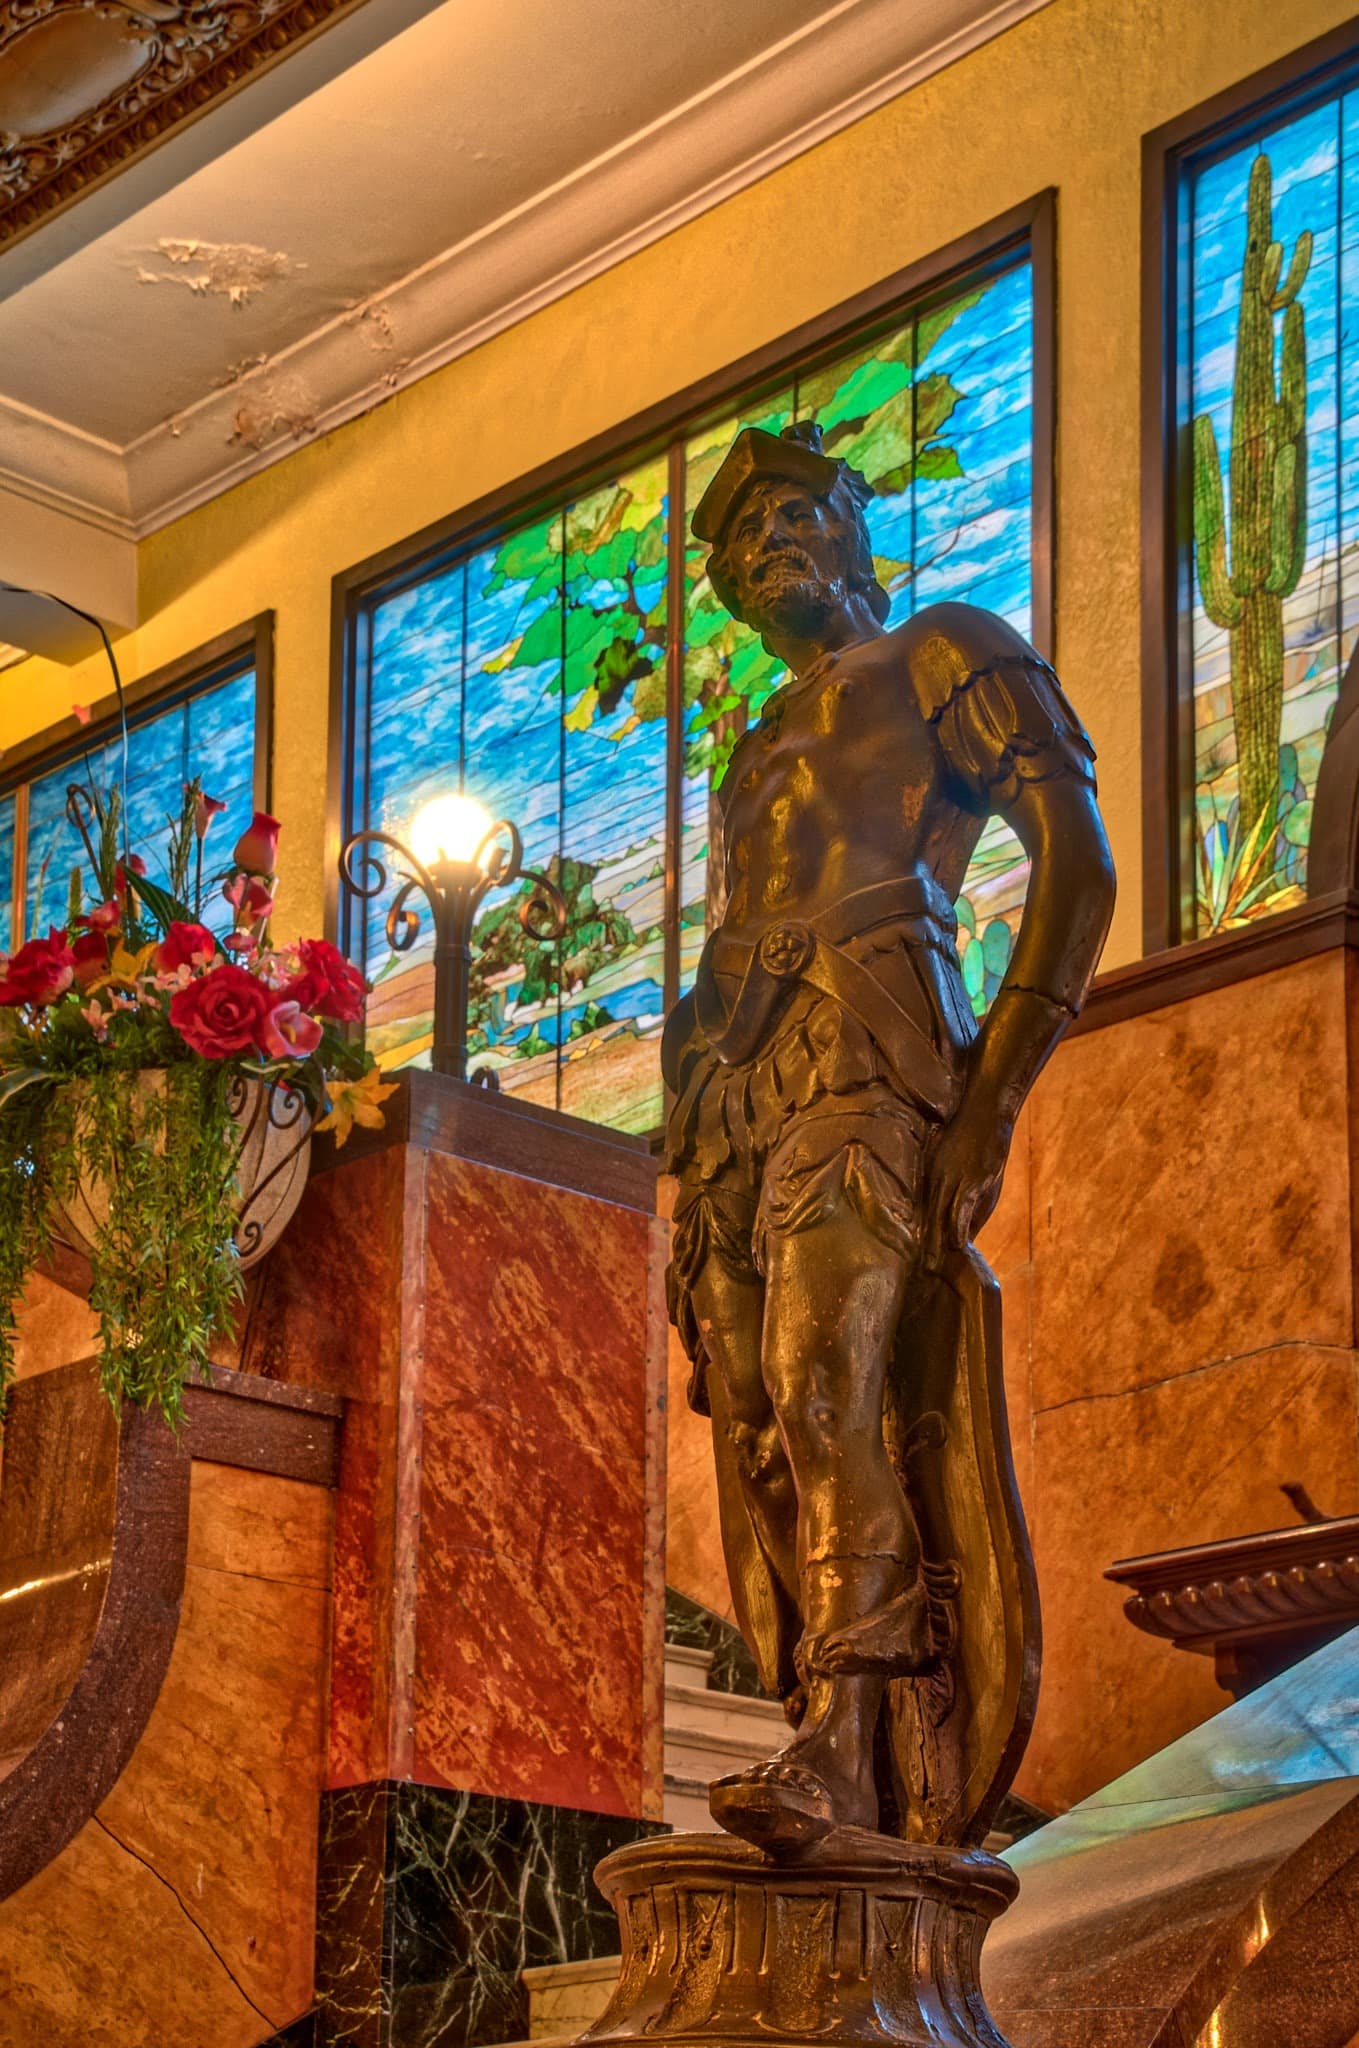 A statue of a conquistador, in honor of the Gadsden Purchase, stands next to the grand staircase in the lobby of the Gadsden Hotel in Douglas, Arizona.